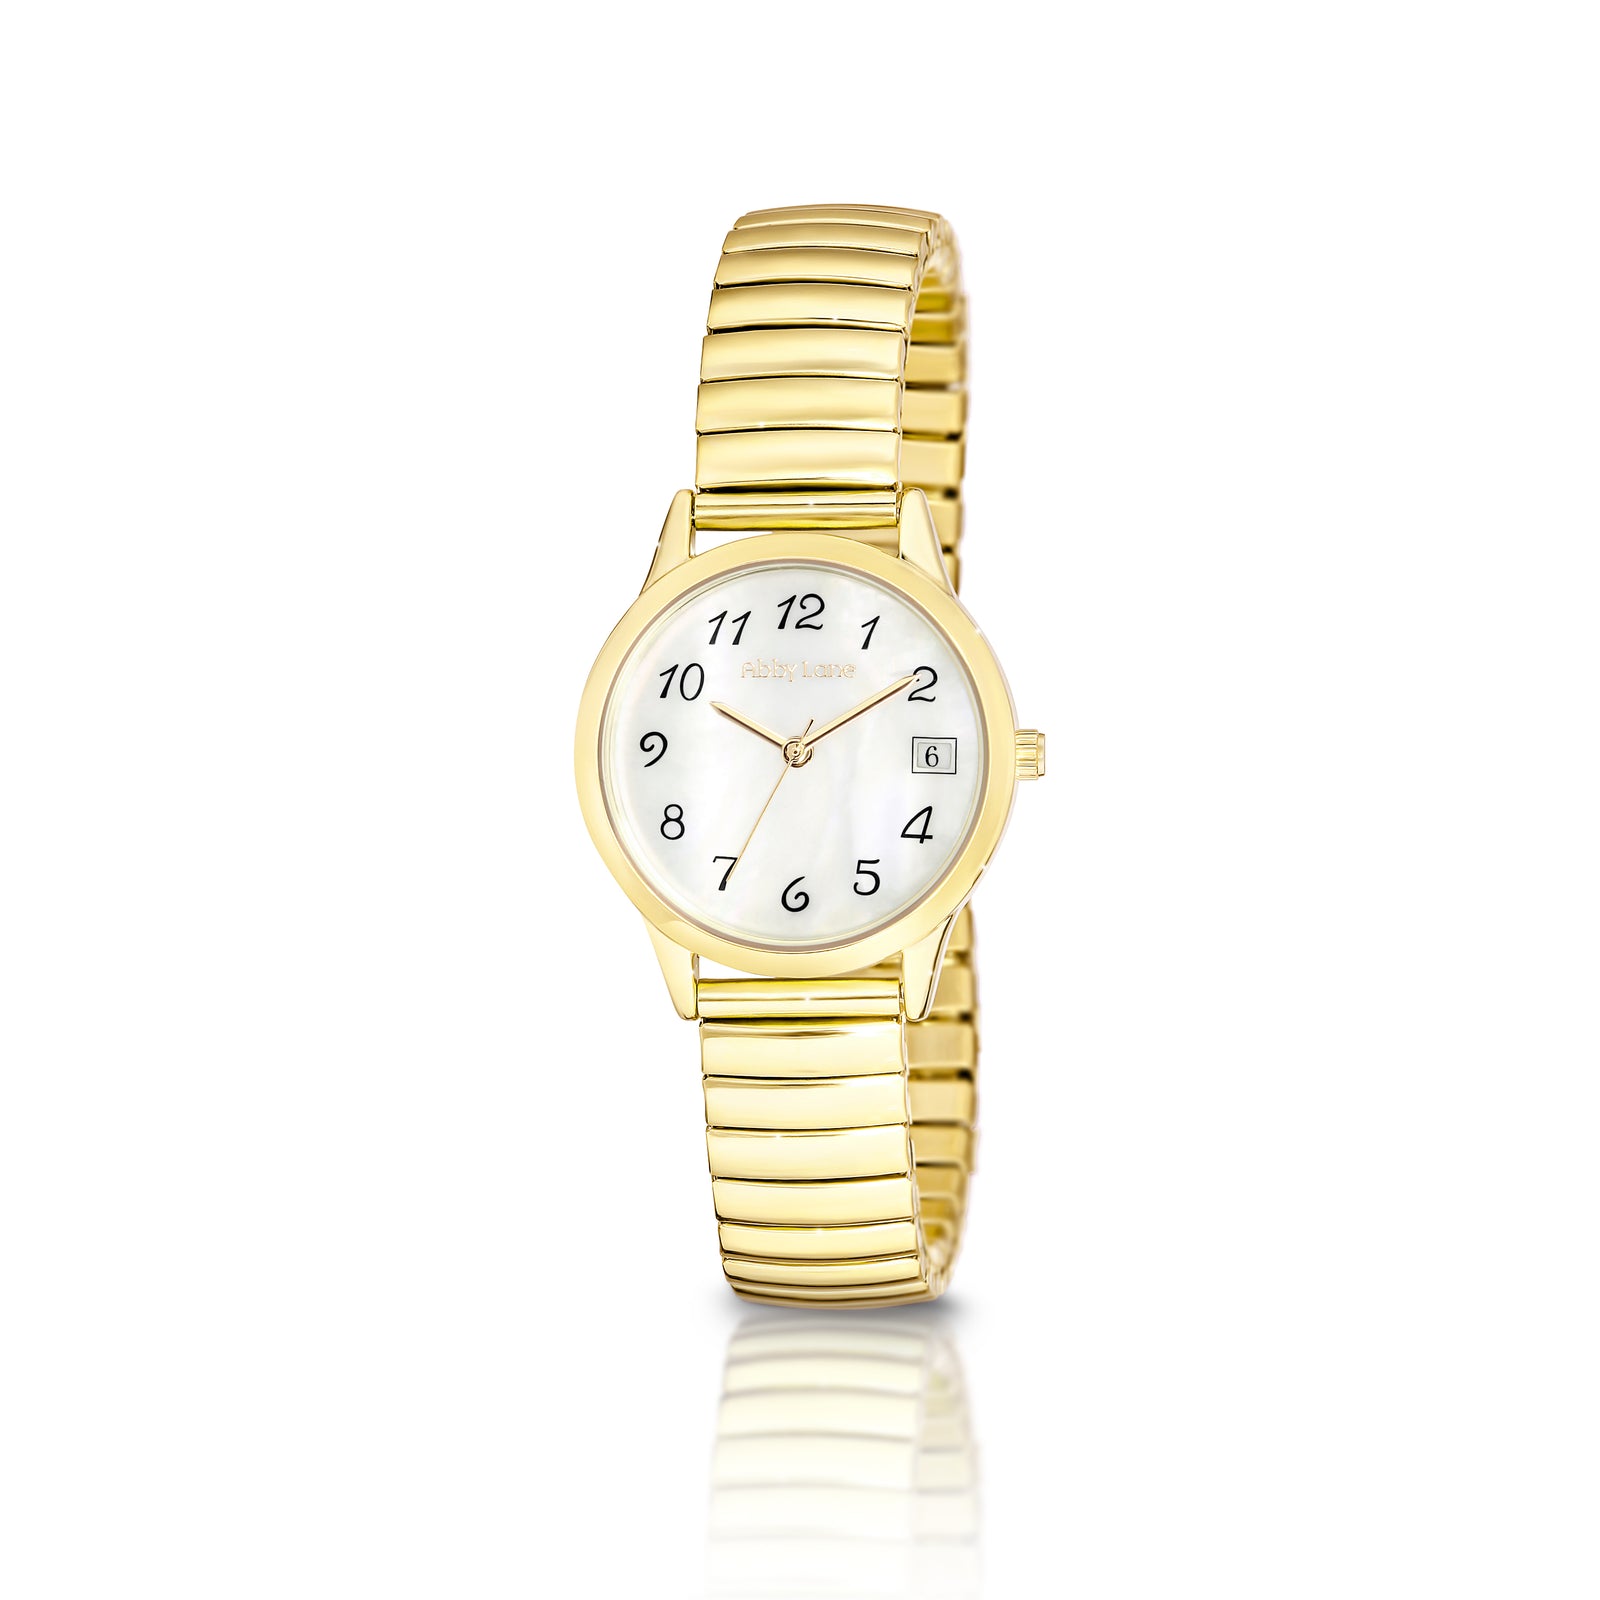 Abby Lane 'Jane' Collection Gold Plated Ladies Watch